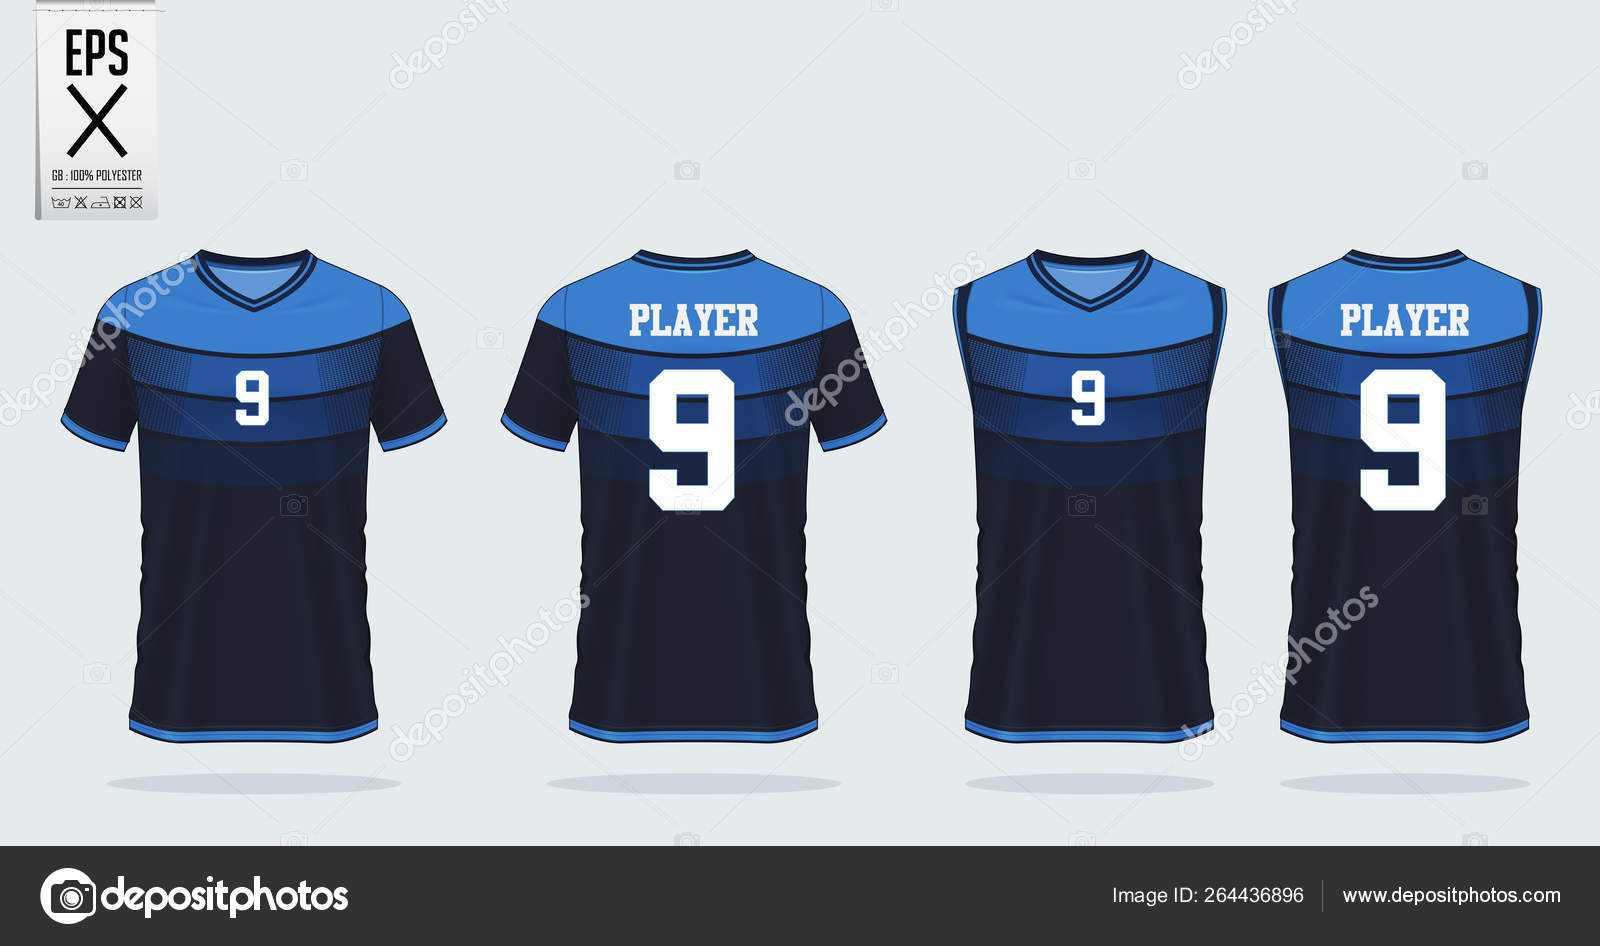 Download Blue T Shirt Sport Mockup Template Design For Soccer Jersey Football Kit And Tank Top For Basketball Jersey Sport Uniform In Front And Back View Sport Shirt Template For Sport Club Vector Illustration